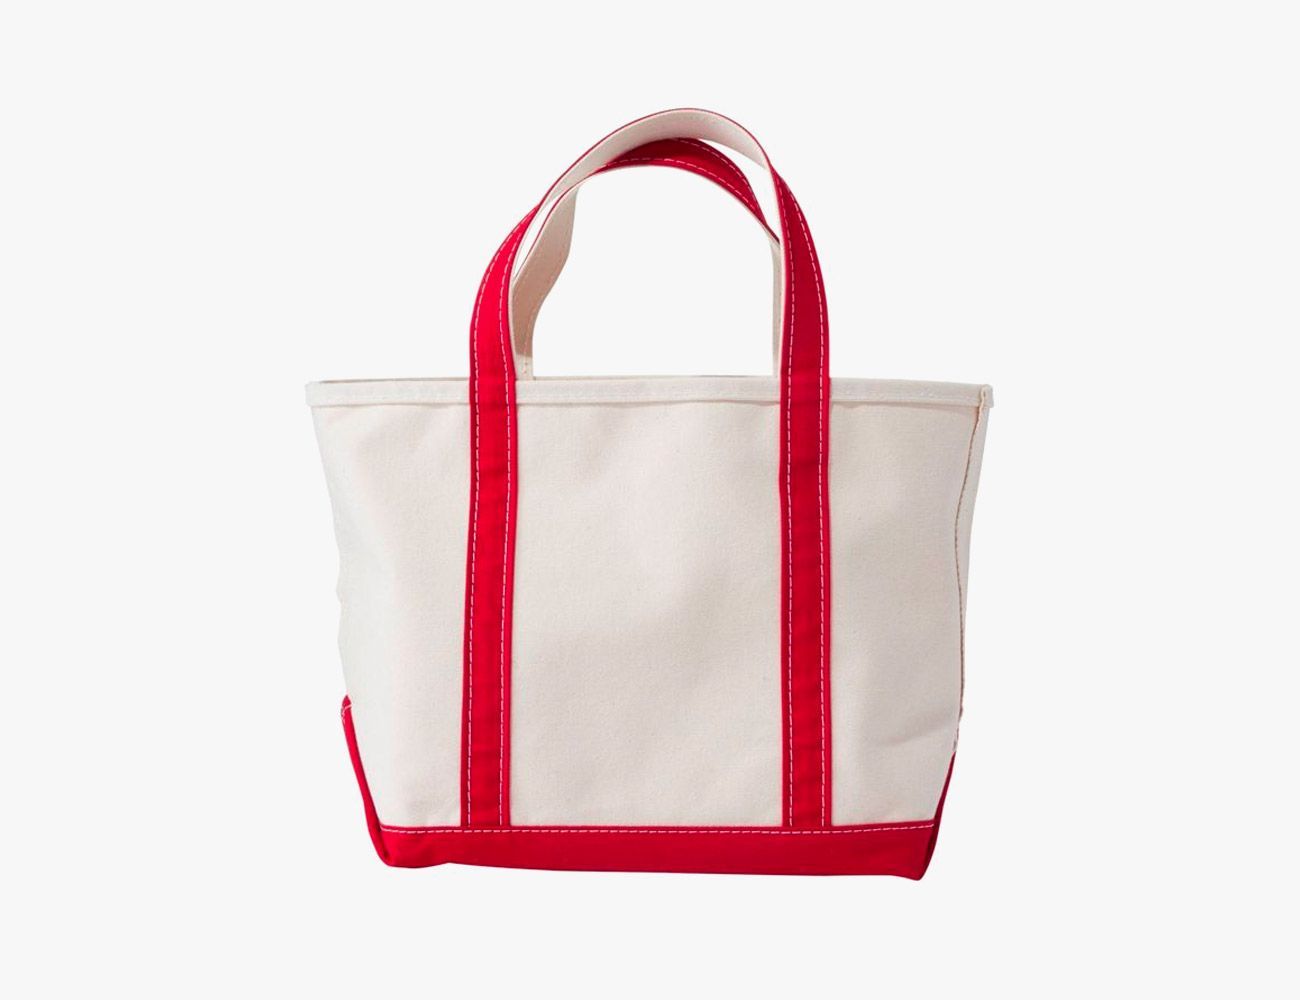 LLG Quote: Best. Mom. Ever. Beach Tote Bag w. Inside Pocket & Top Zipper w.  Message & Signature inside. w. Red or Black Handles — Ladies' Life Guide